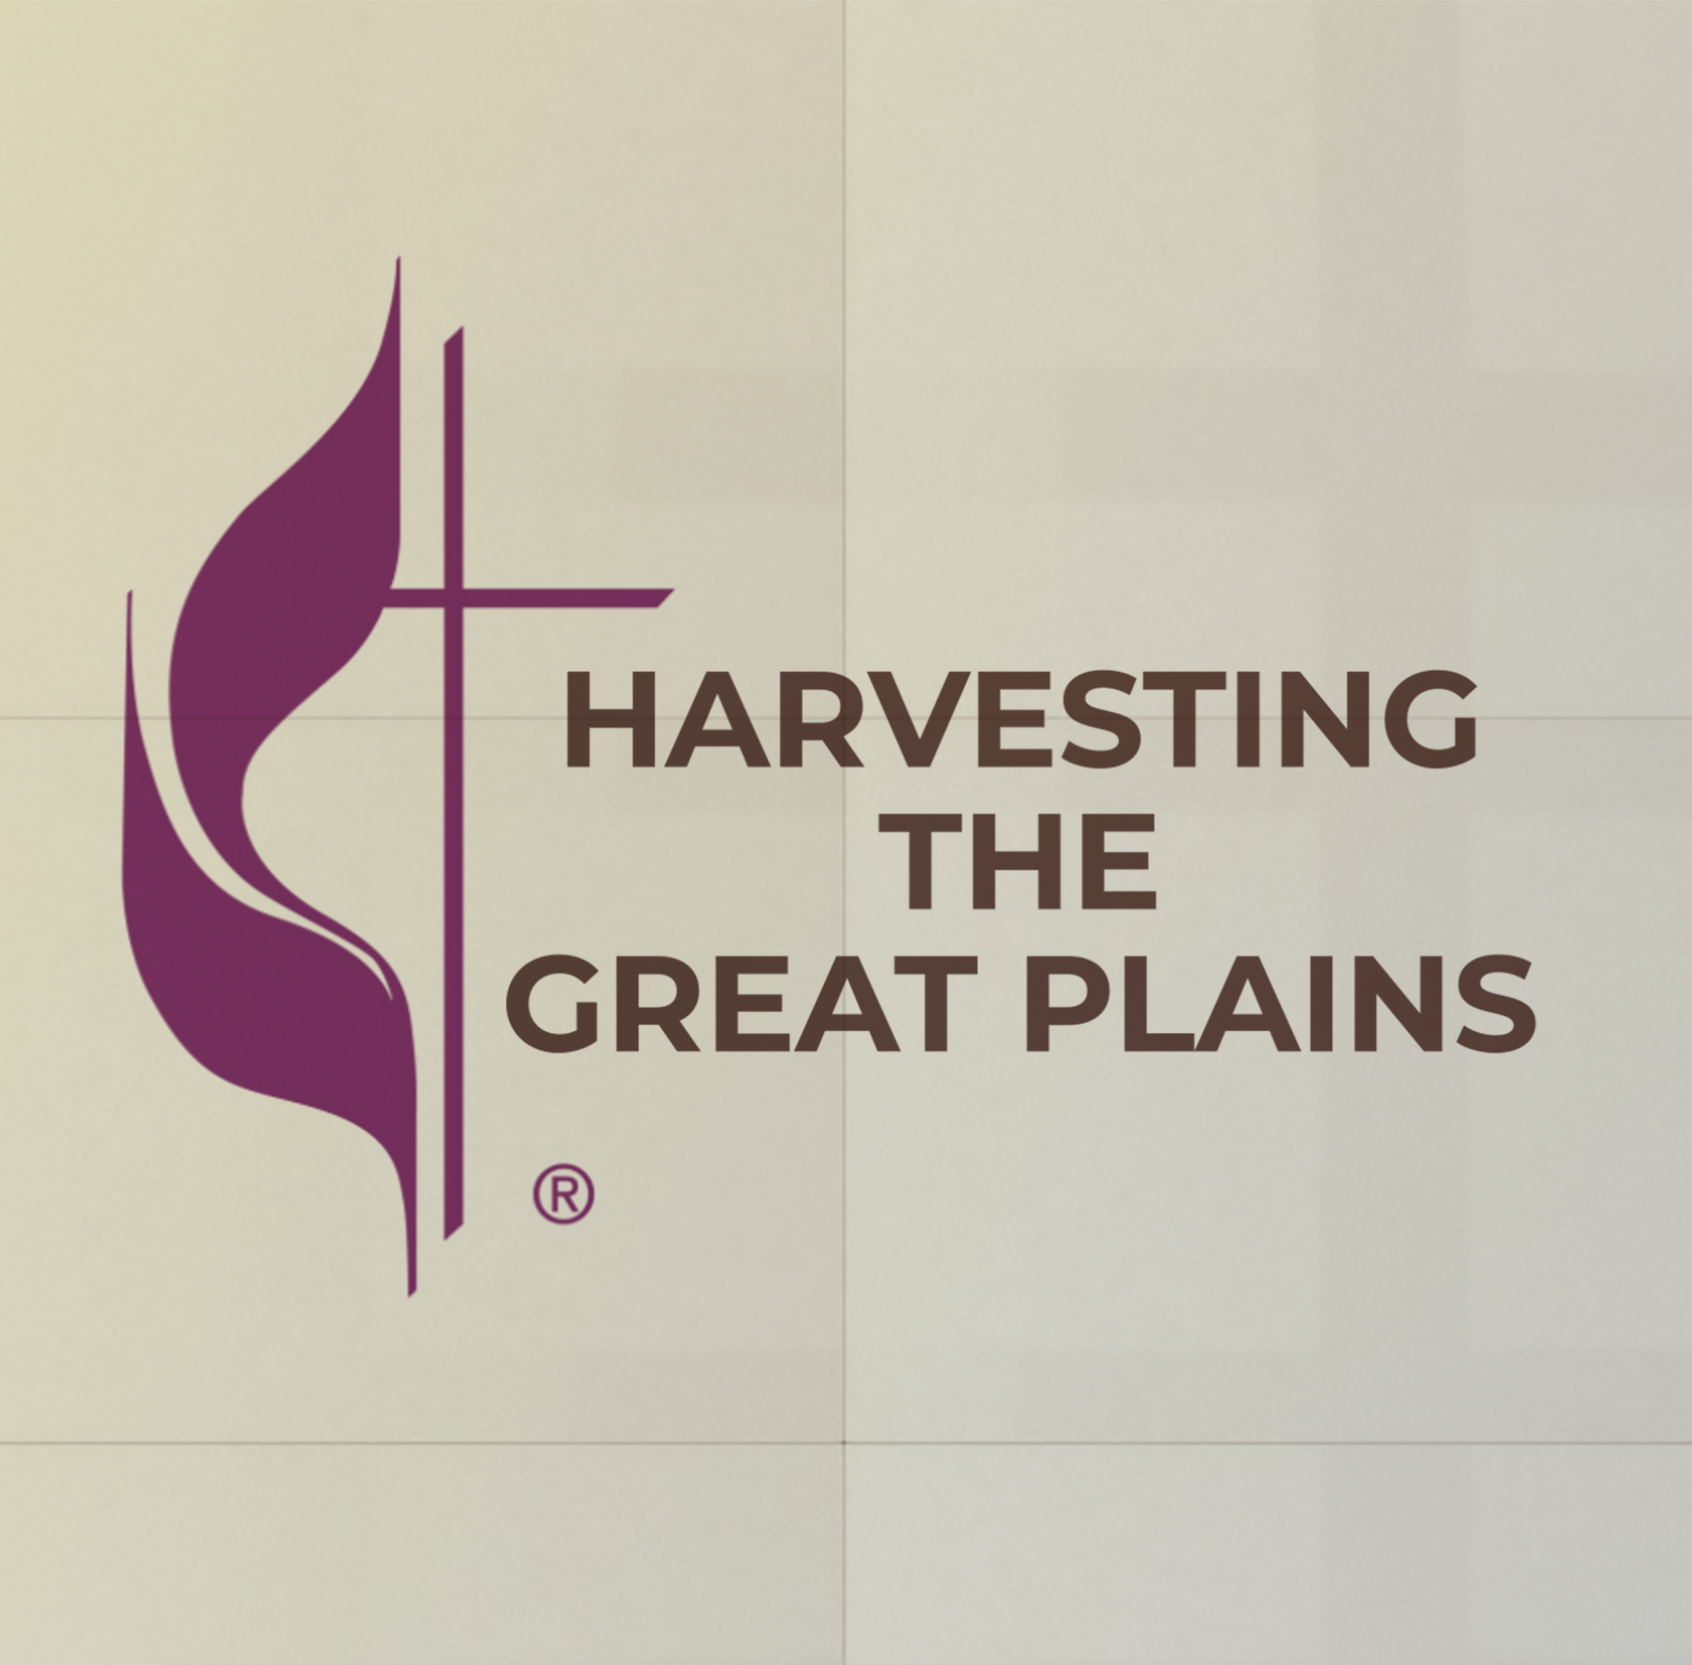 Harvesting the Great Plains